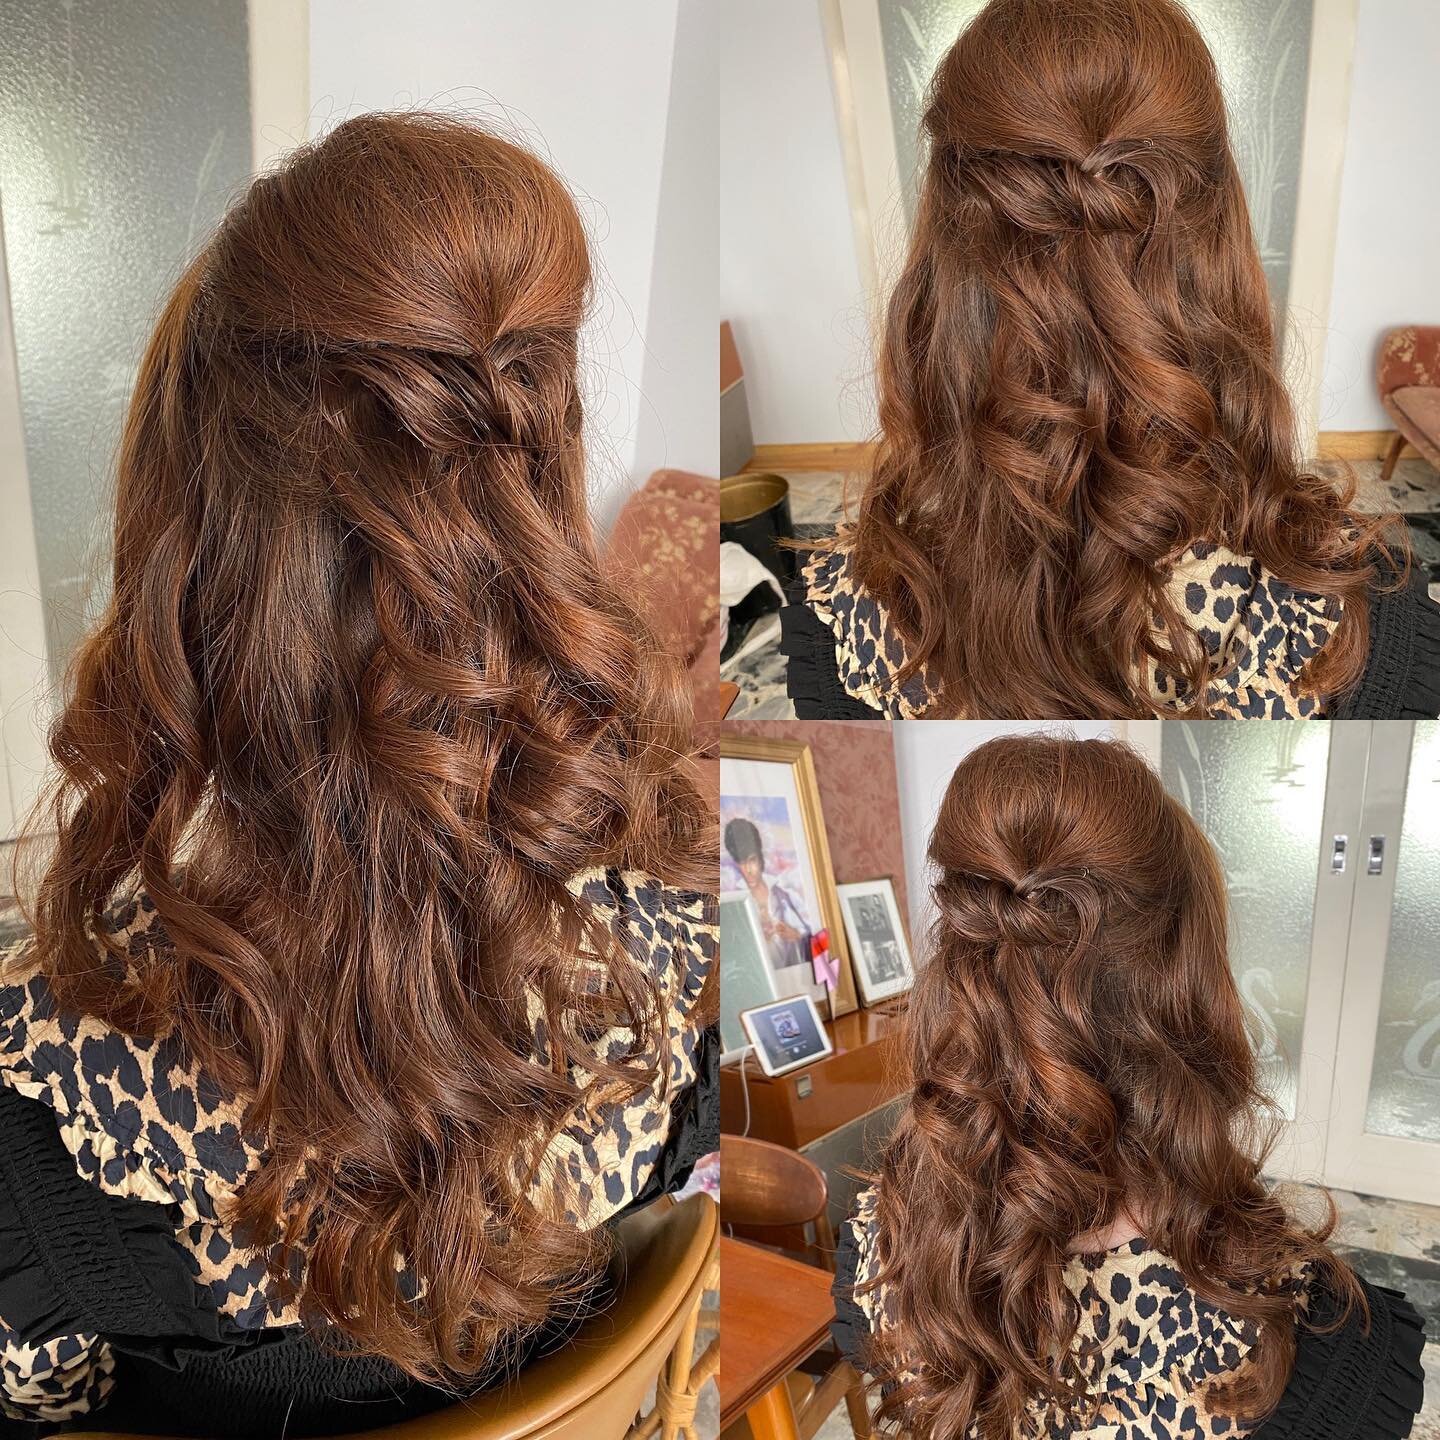 Throwback to this dreamy, vintage wedding hair trial for @minnagilligan and for her engagement party 🥰☁️
Booked through @dana_makeupartist 
#weddinghair #bridalhair #bridalhmua #vintagehair #vintagehairstyle #curls #vintageaesthetic #bridalhairmelbo